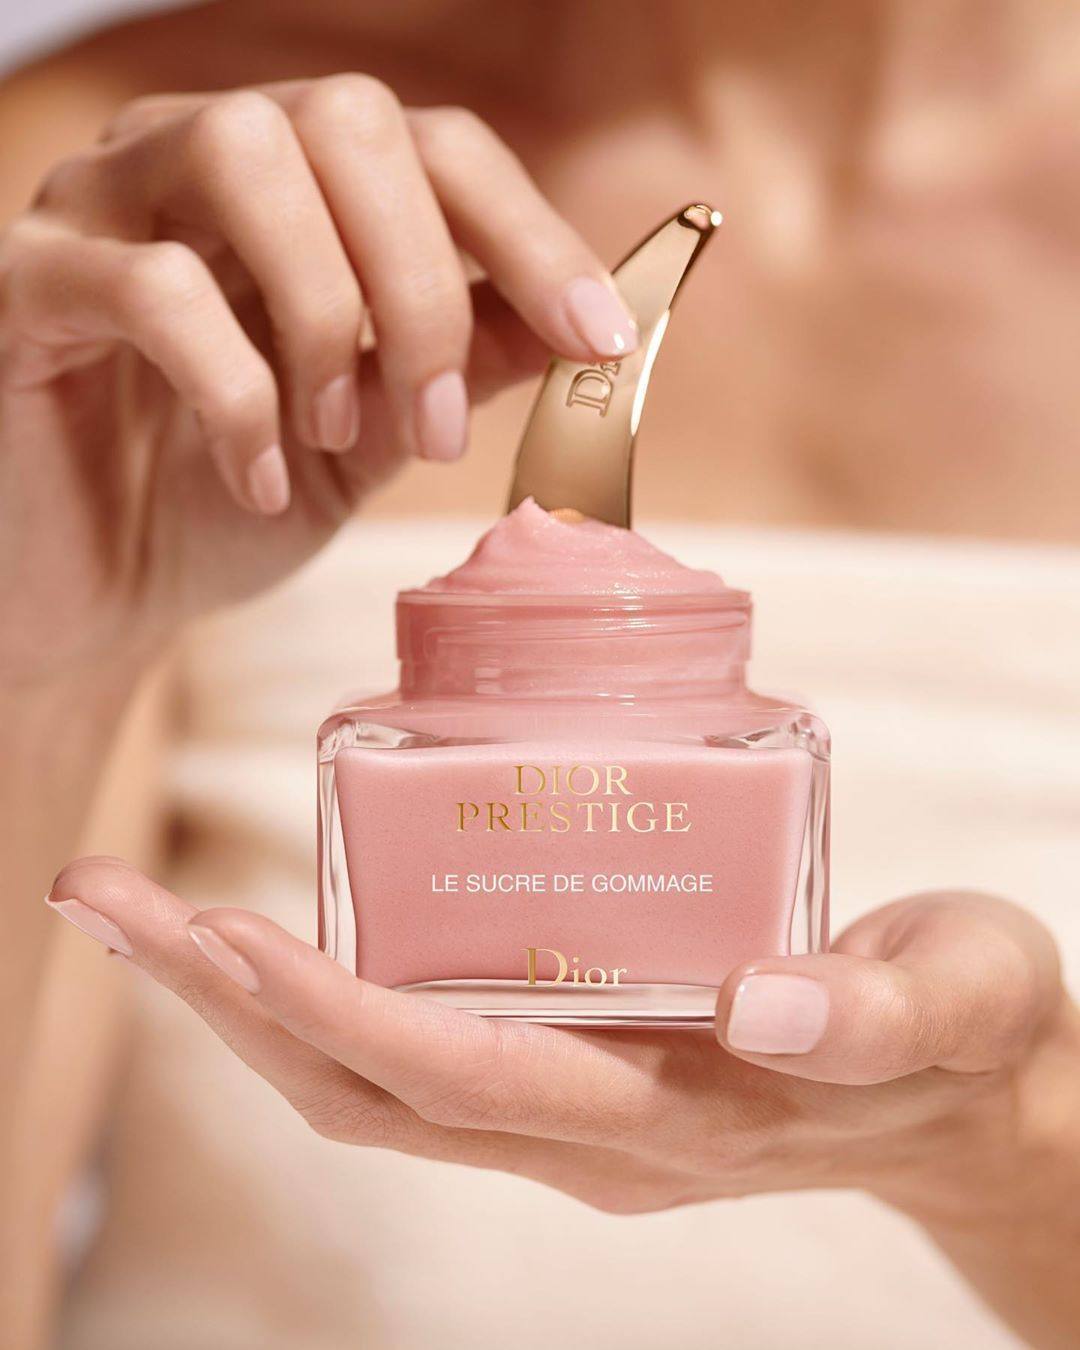 Enriched with the brand’s Rose de Granville micro-nutrients, Dior Prestige Le Sucre de Gommage is an exfoliating and polishing mask for the face and lips – and an example of a gentle alternative to a professional chemical peel. Photos: Handouts